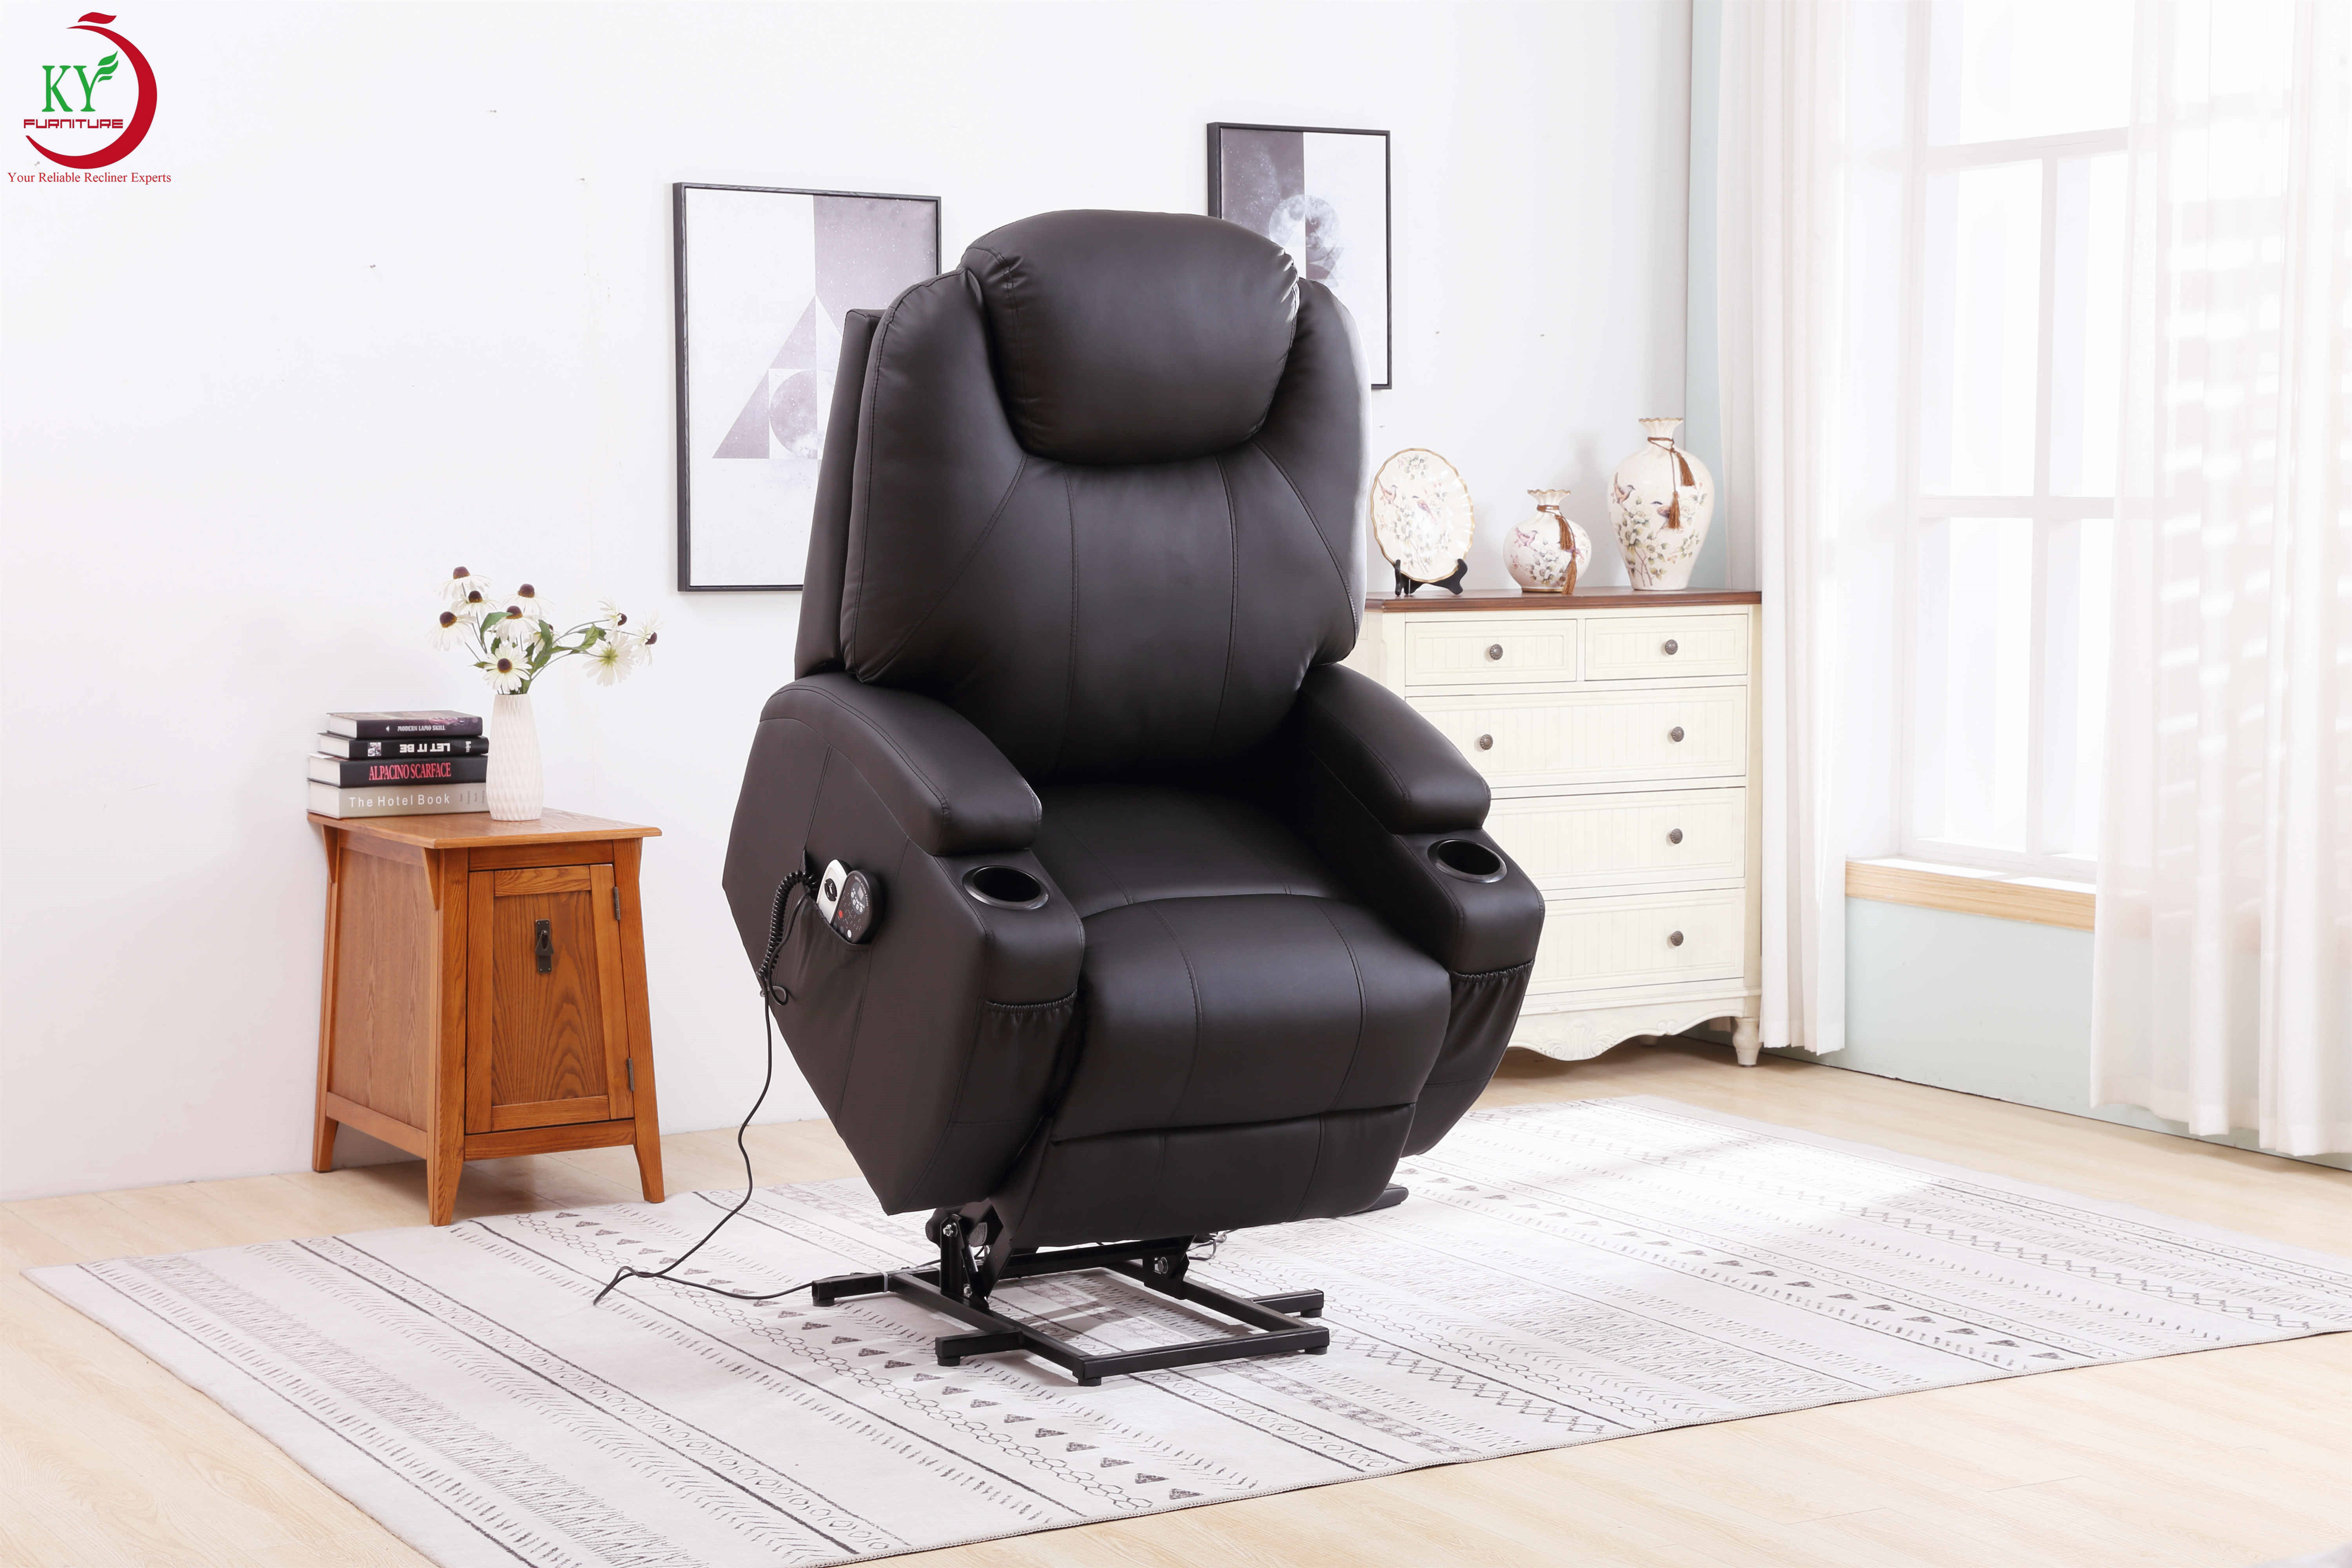 Electric Power Lift Chair With Health Benefits